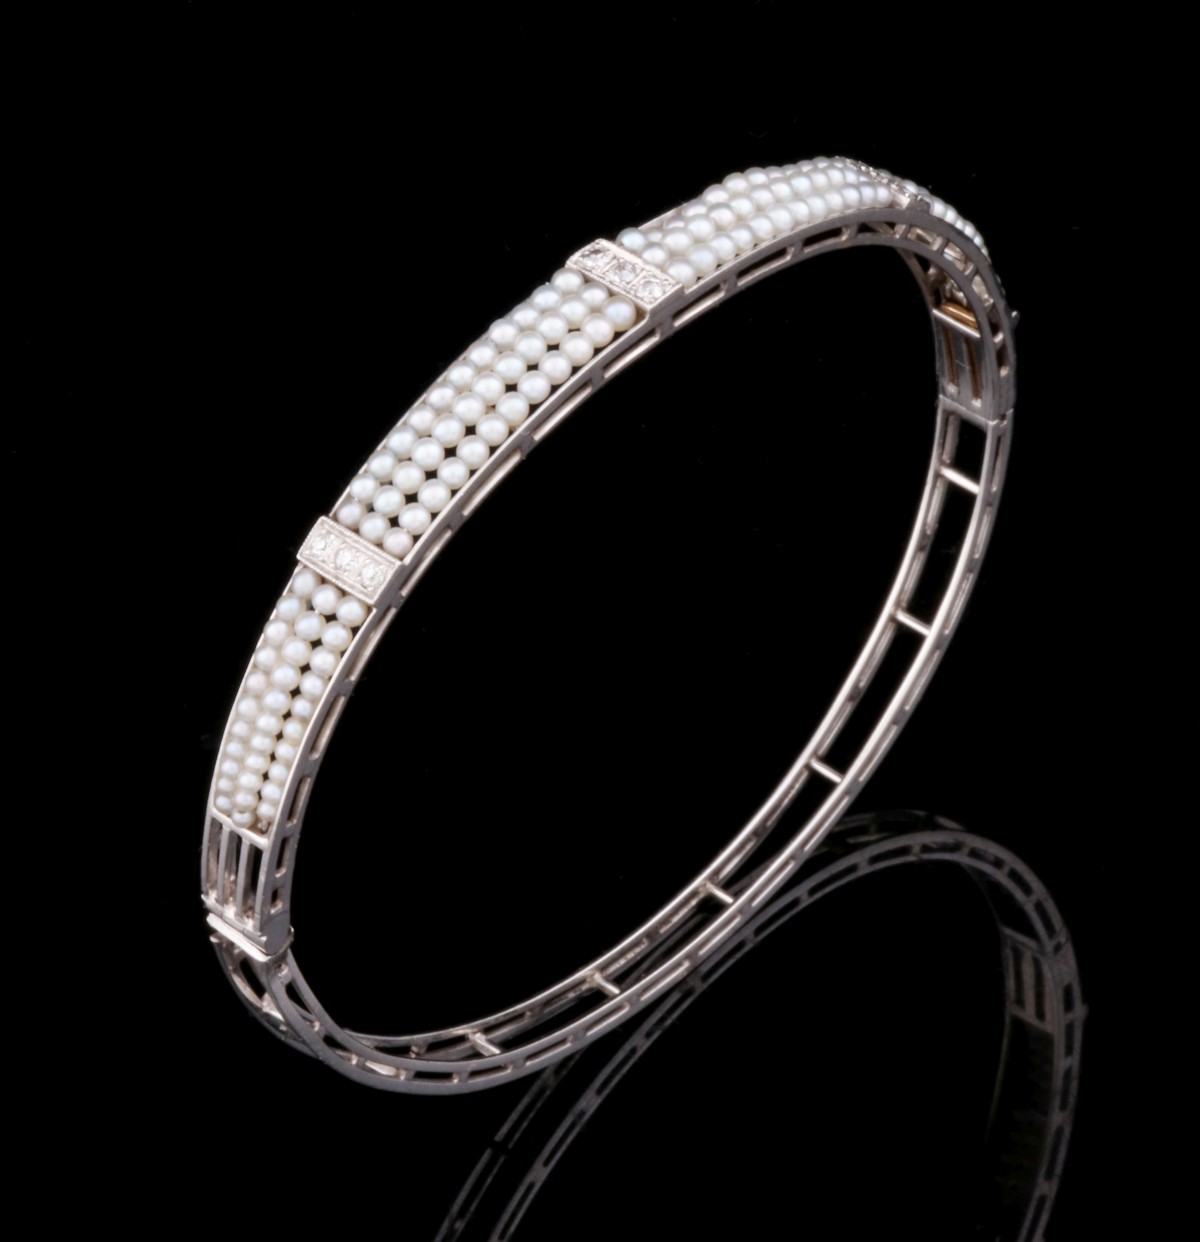 AN ART DECO INFLUENCE PLATINUM BRACELET WITH SEED PEARL